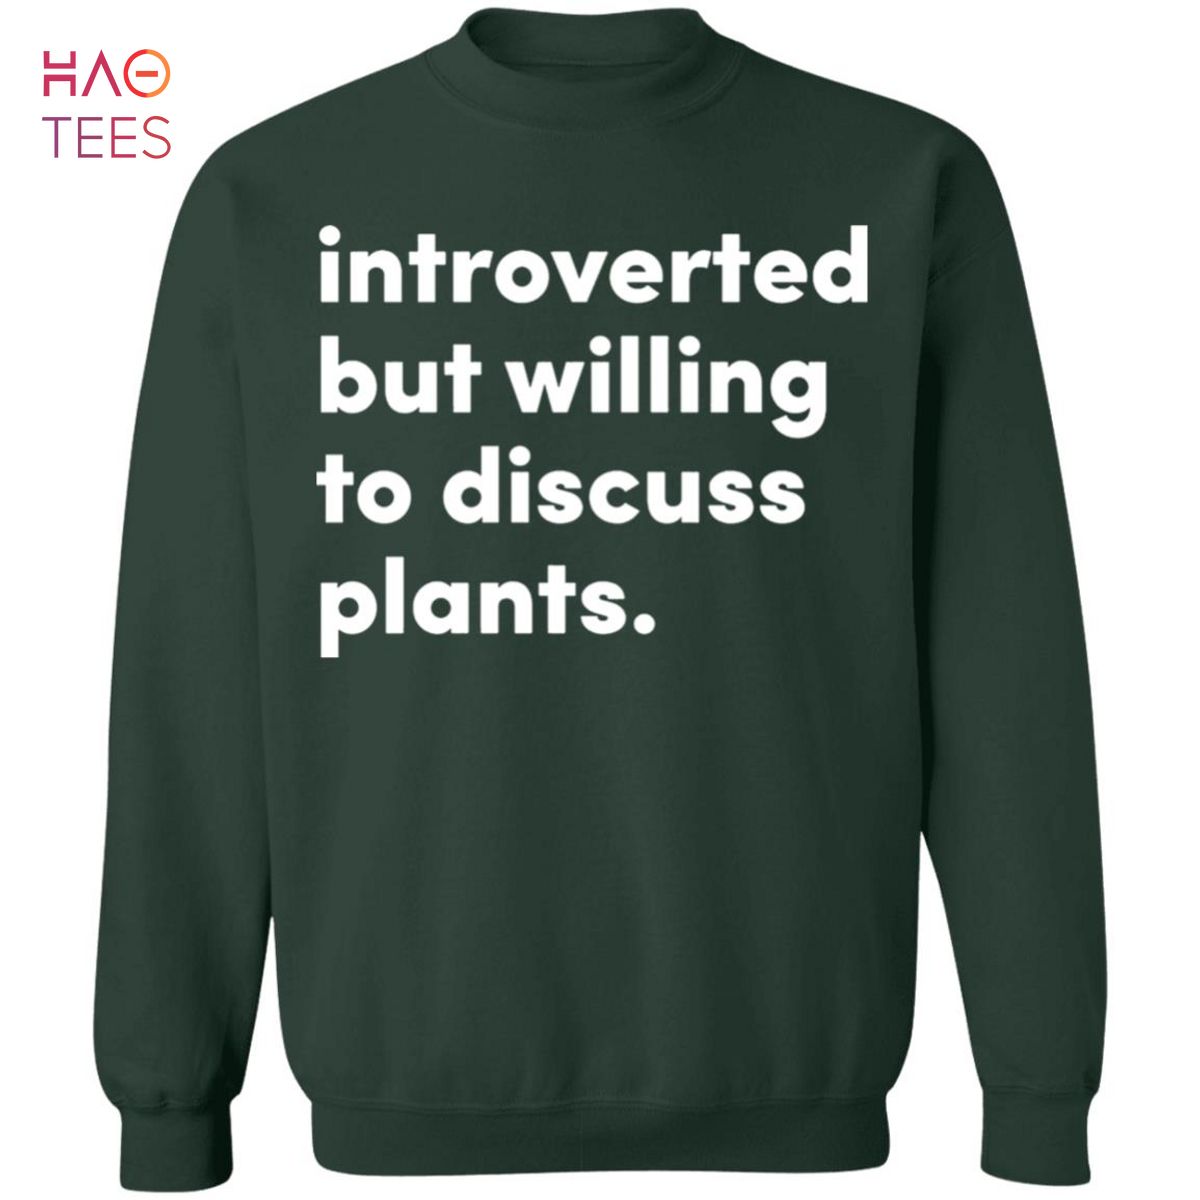 [NEW] Introverted But Willing To Discuss Plants Sweater